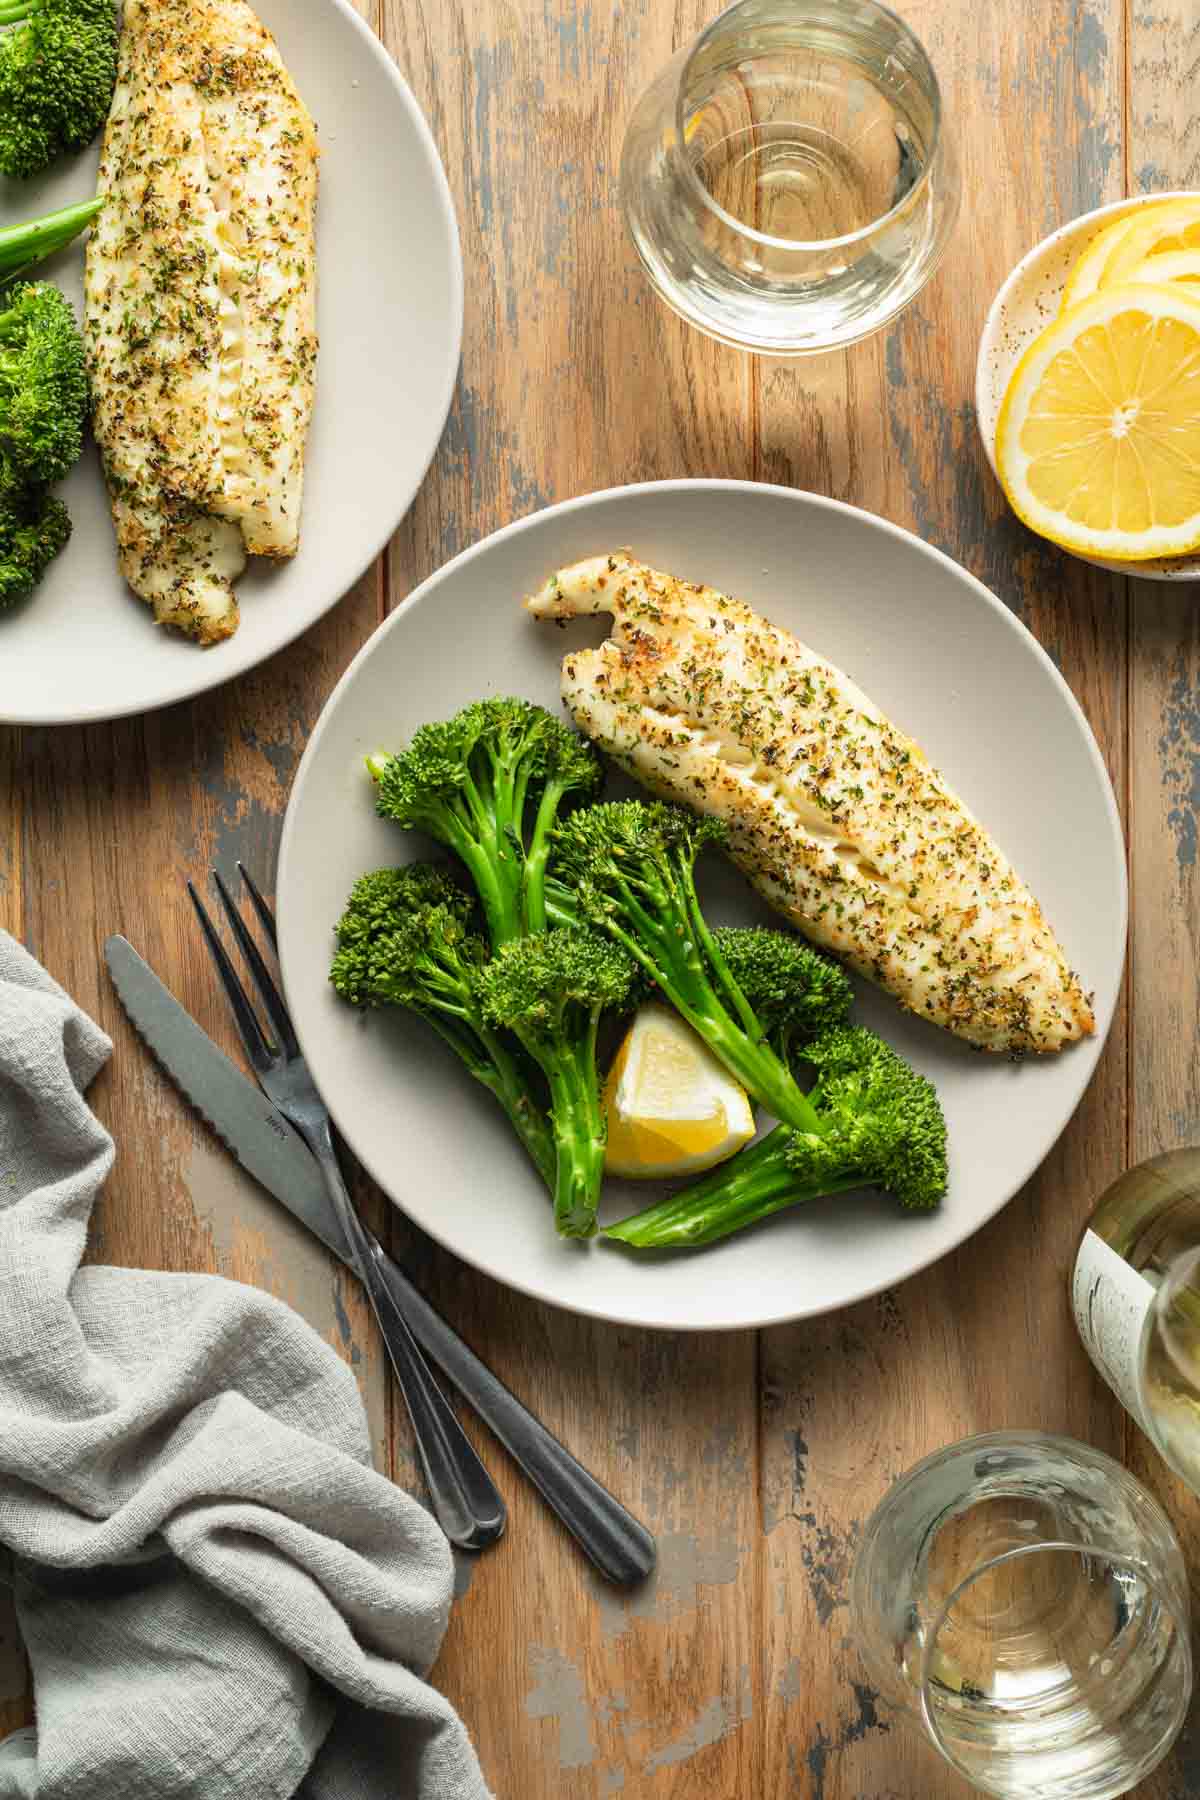 Two plates of tilapia and roasted broccoli arranged on a table.